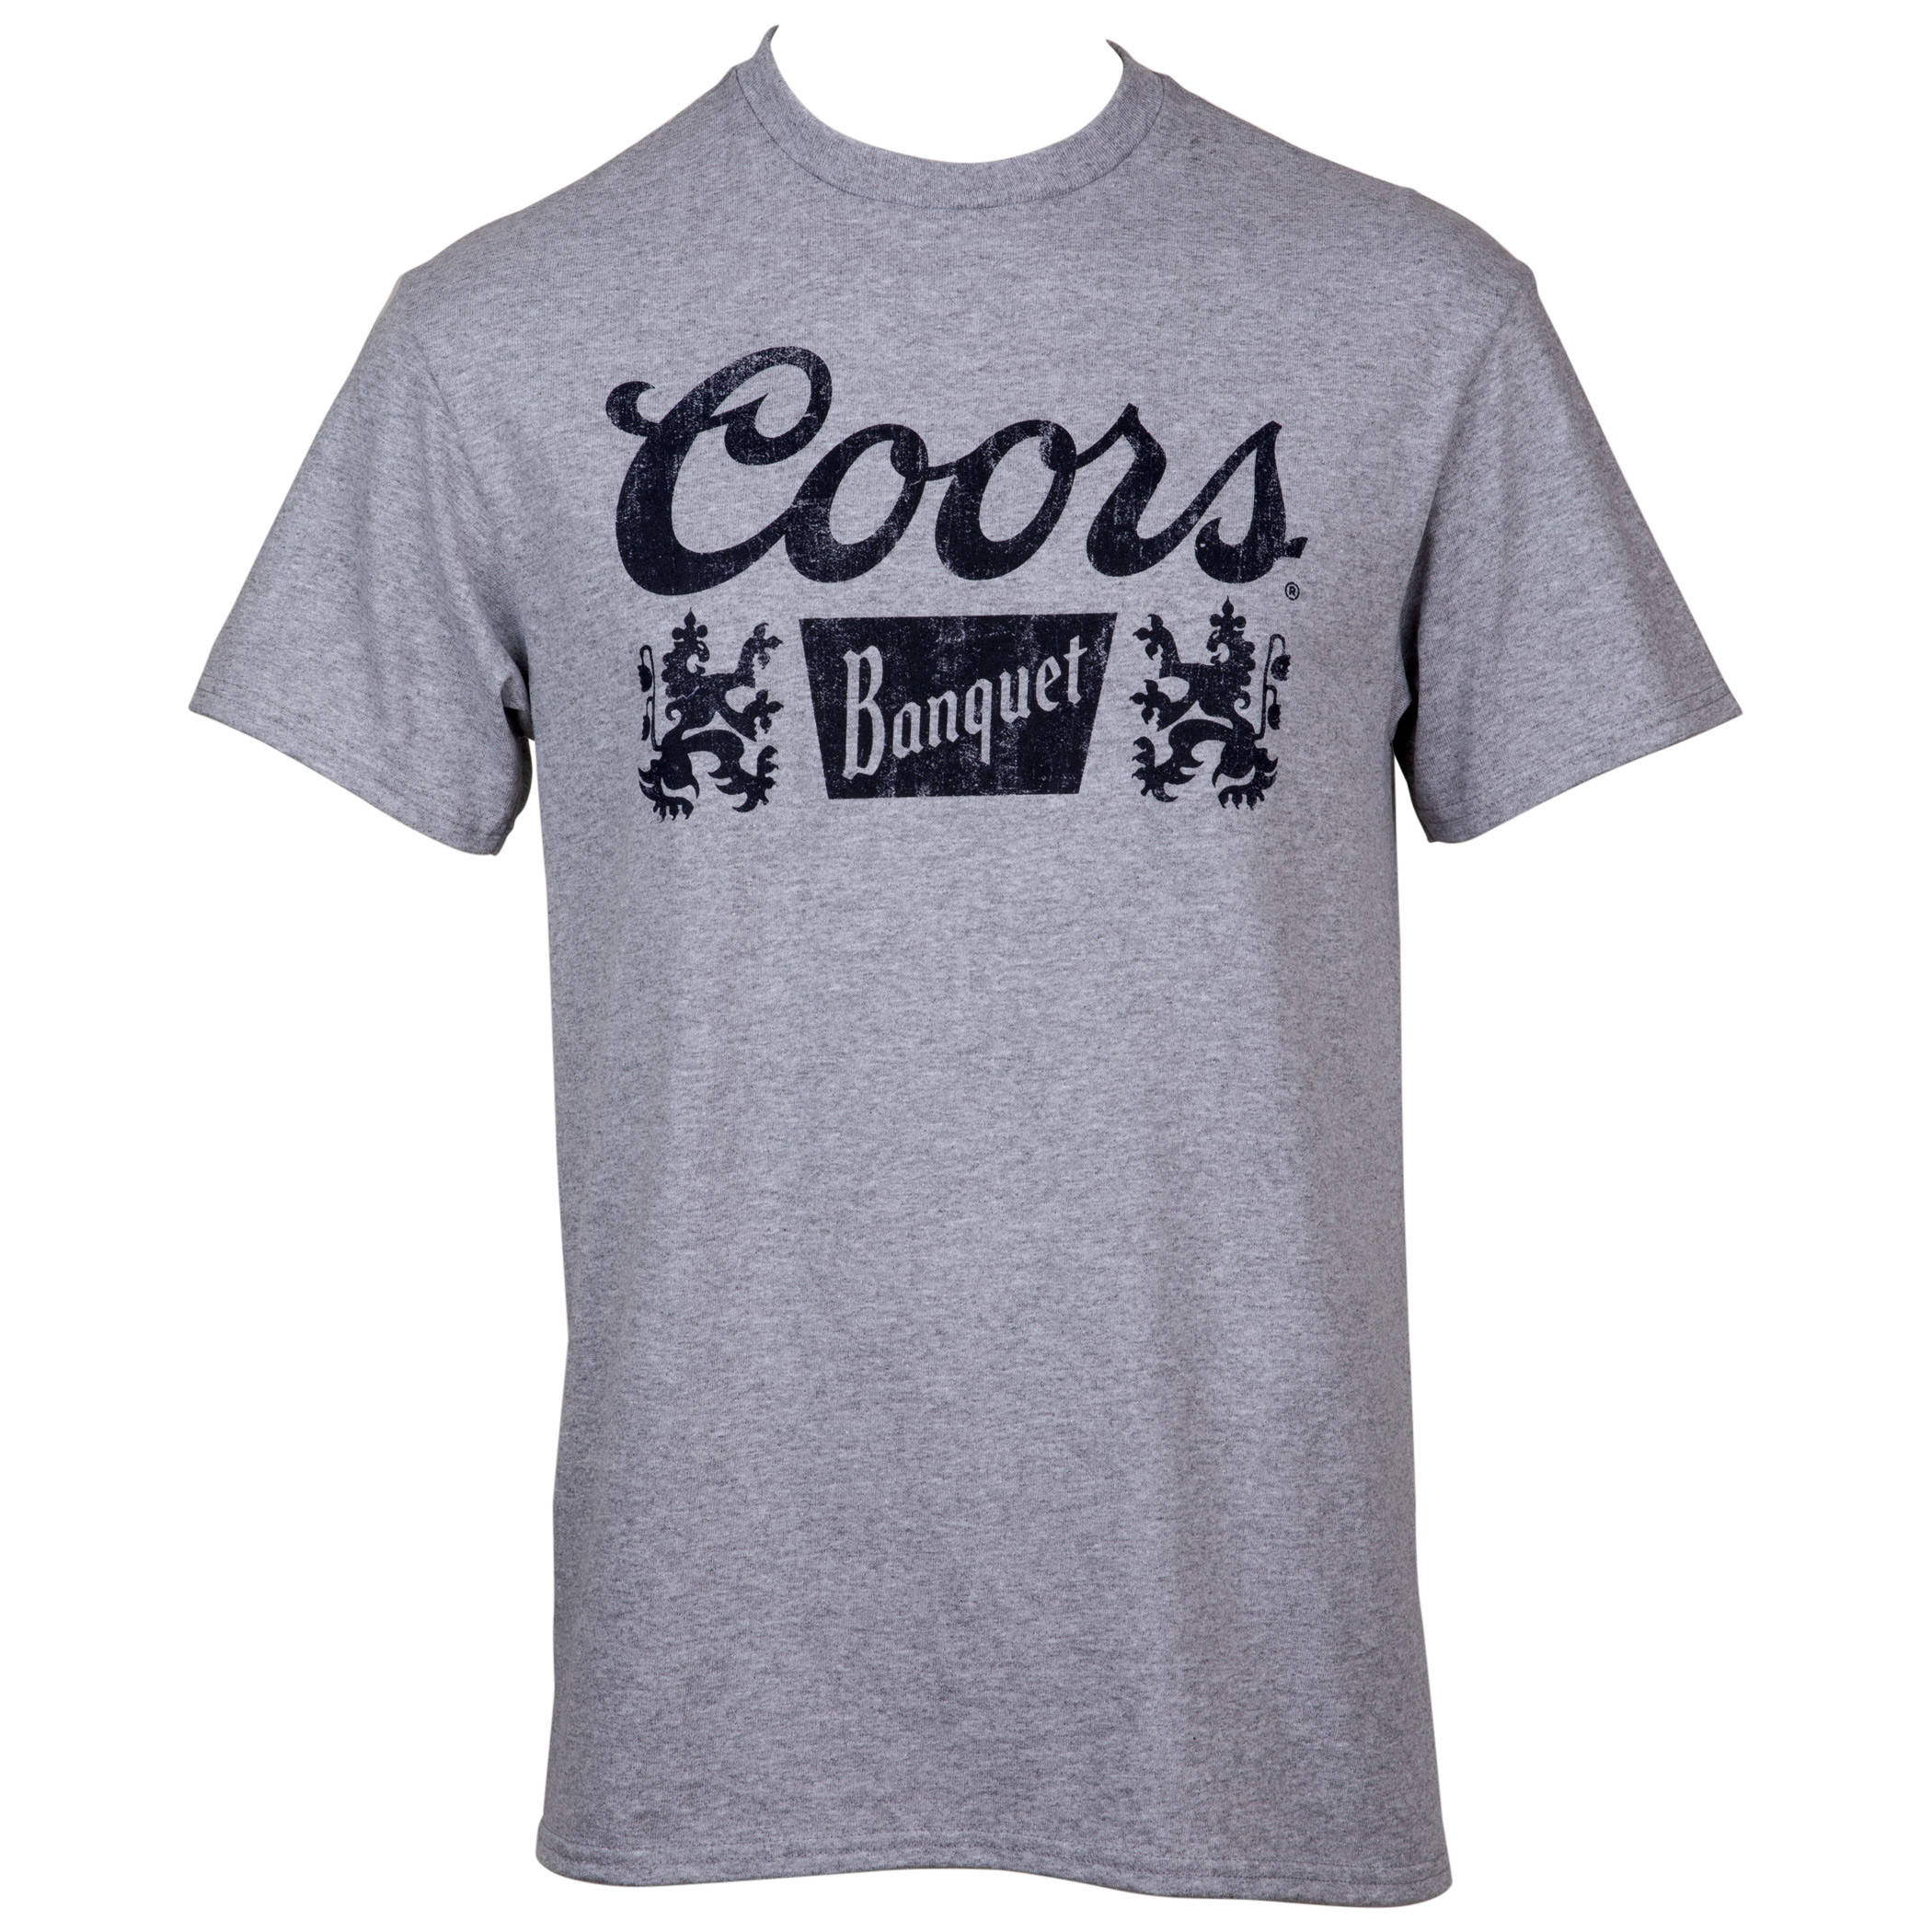 Coors Banquet Logo Distressed Print Grey Colorway T-Shirt